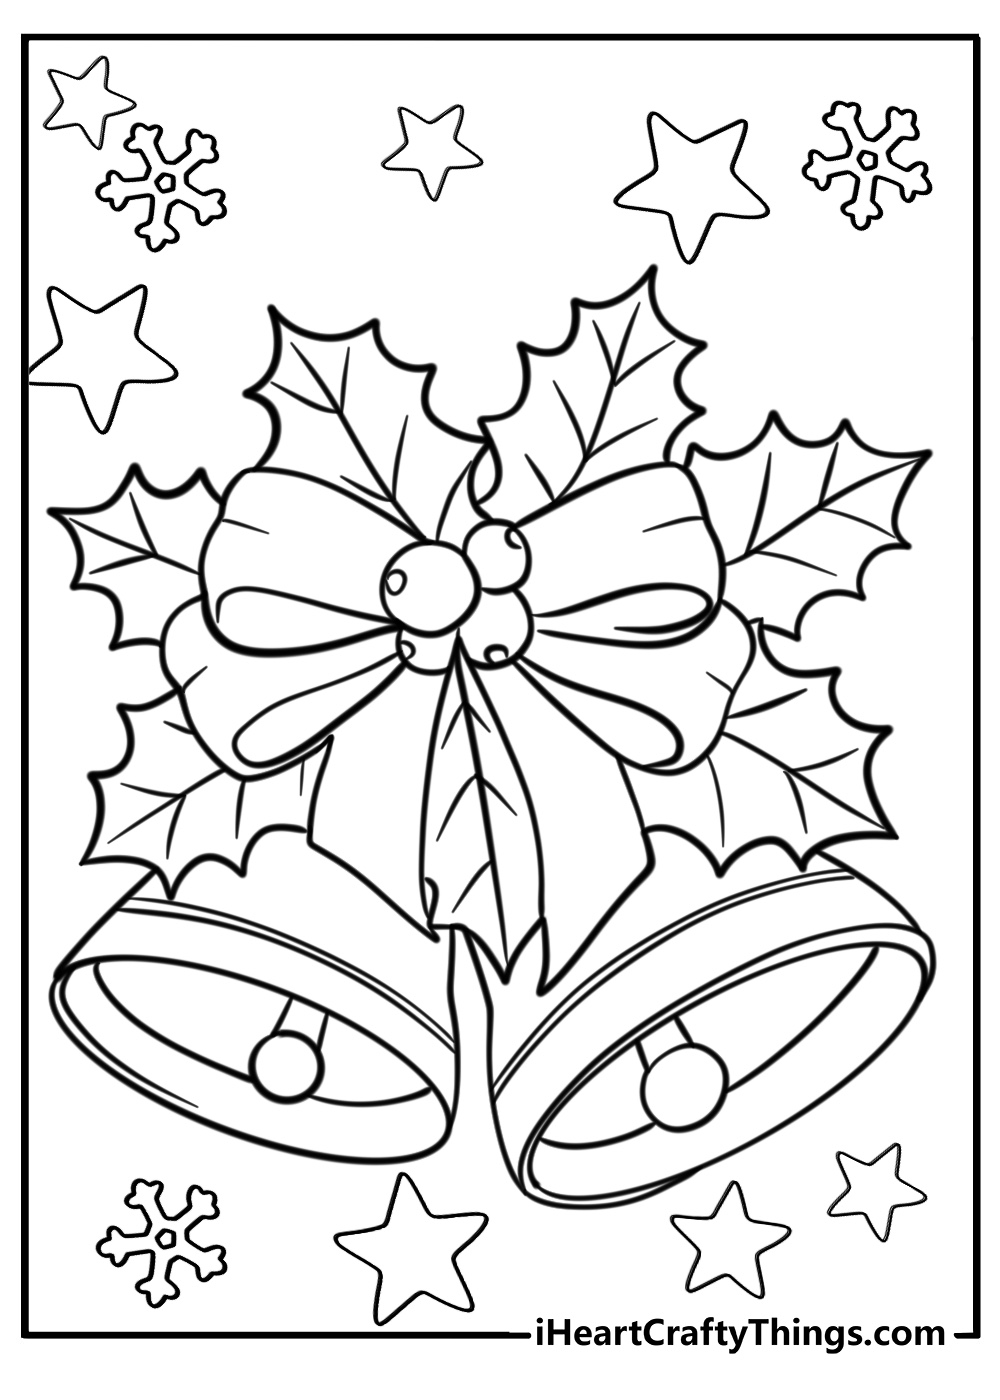 Mistletoes coloring pages for christmas